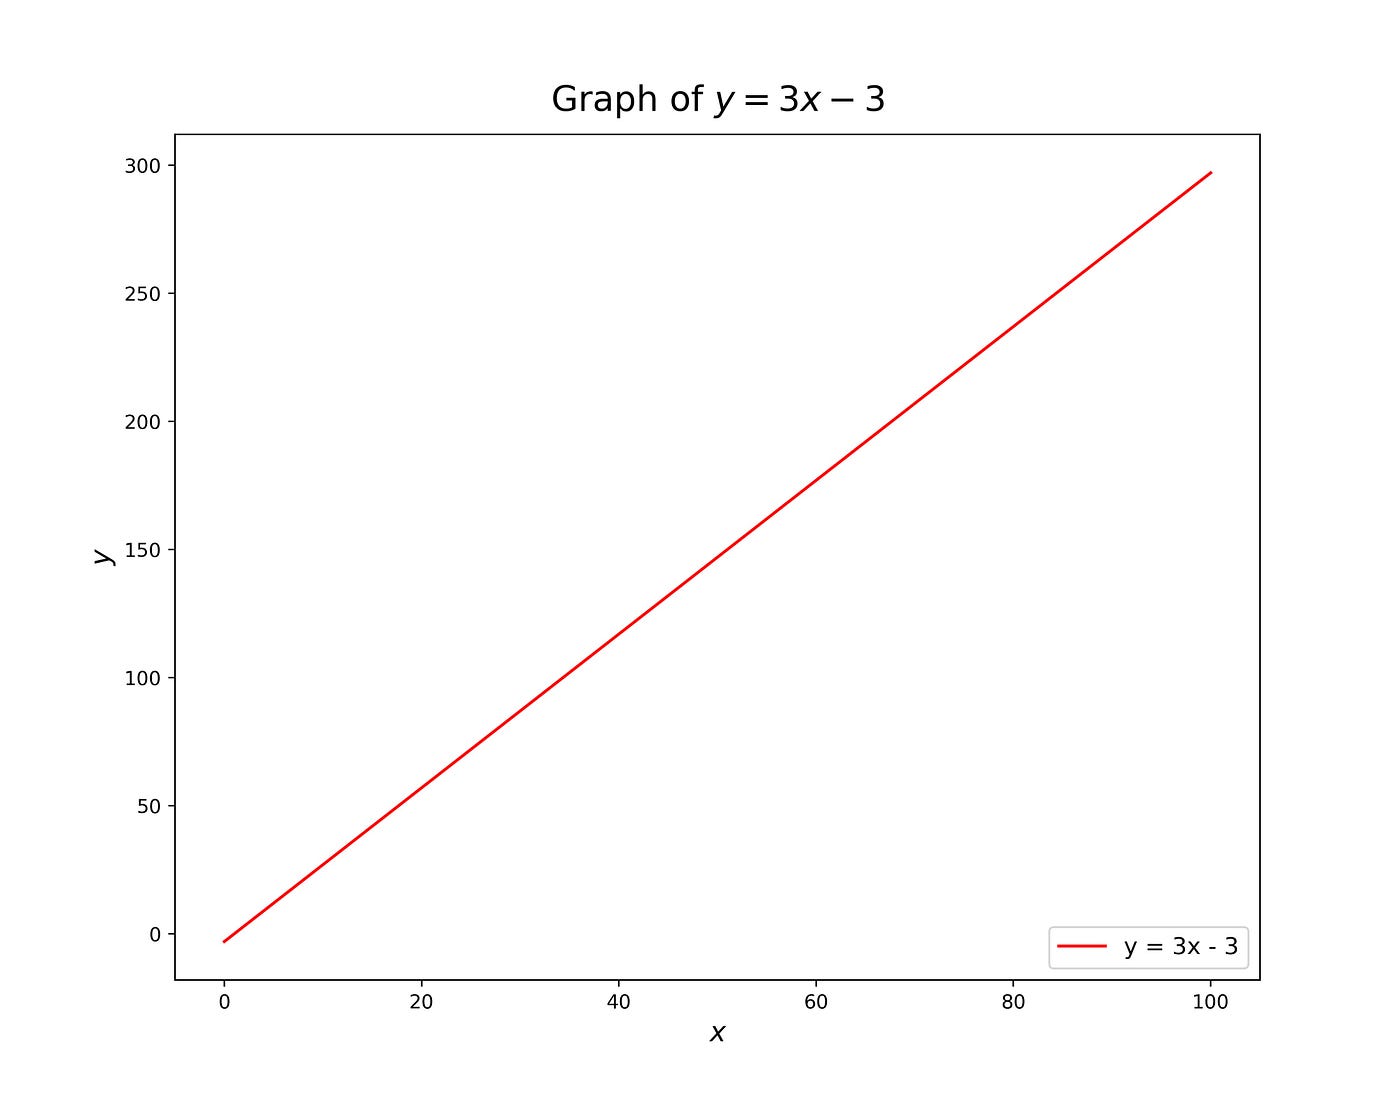 Simple computer-generated graph, showing a red line that starts in the bottom left corner of the graph and moves up to the top right corner, corresponding with the function “y equals m x plus b”.